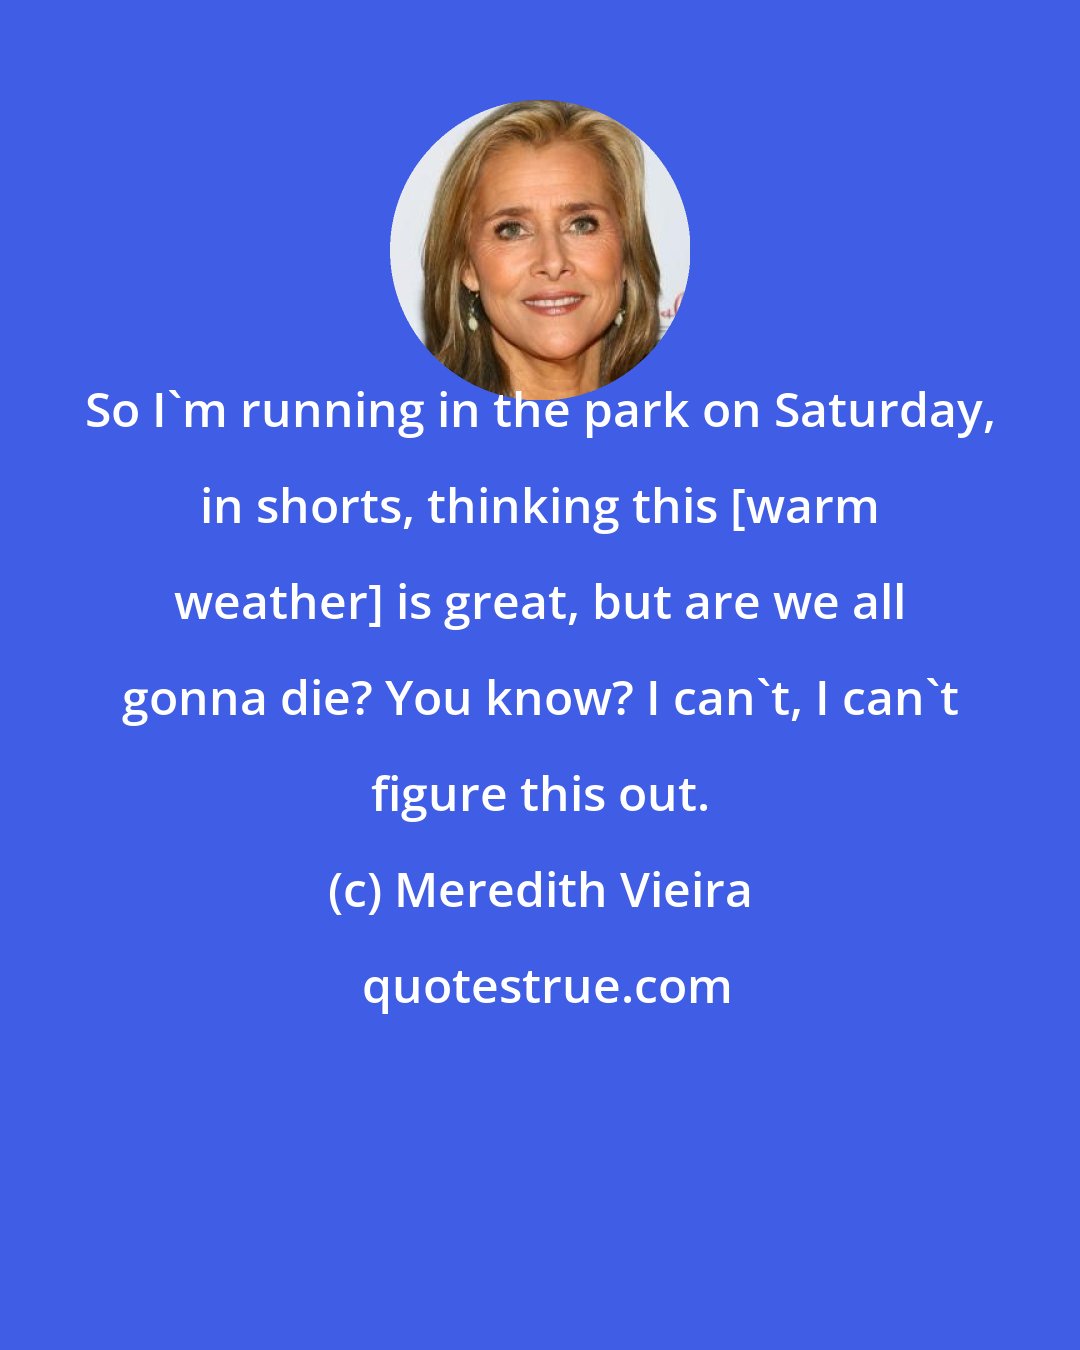 Meredith Vieira: So I'm running in the park on Saturday, in shorts, thinking this [warm weather] is great, but are we all gonna die? You know? I can't, I can't figure this out.